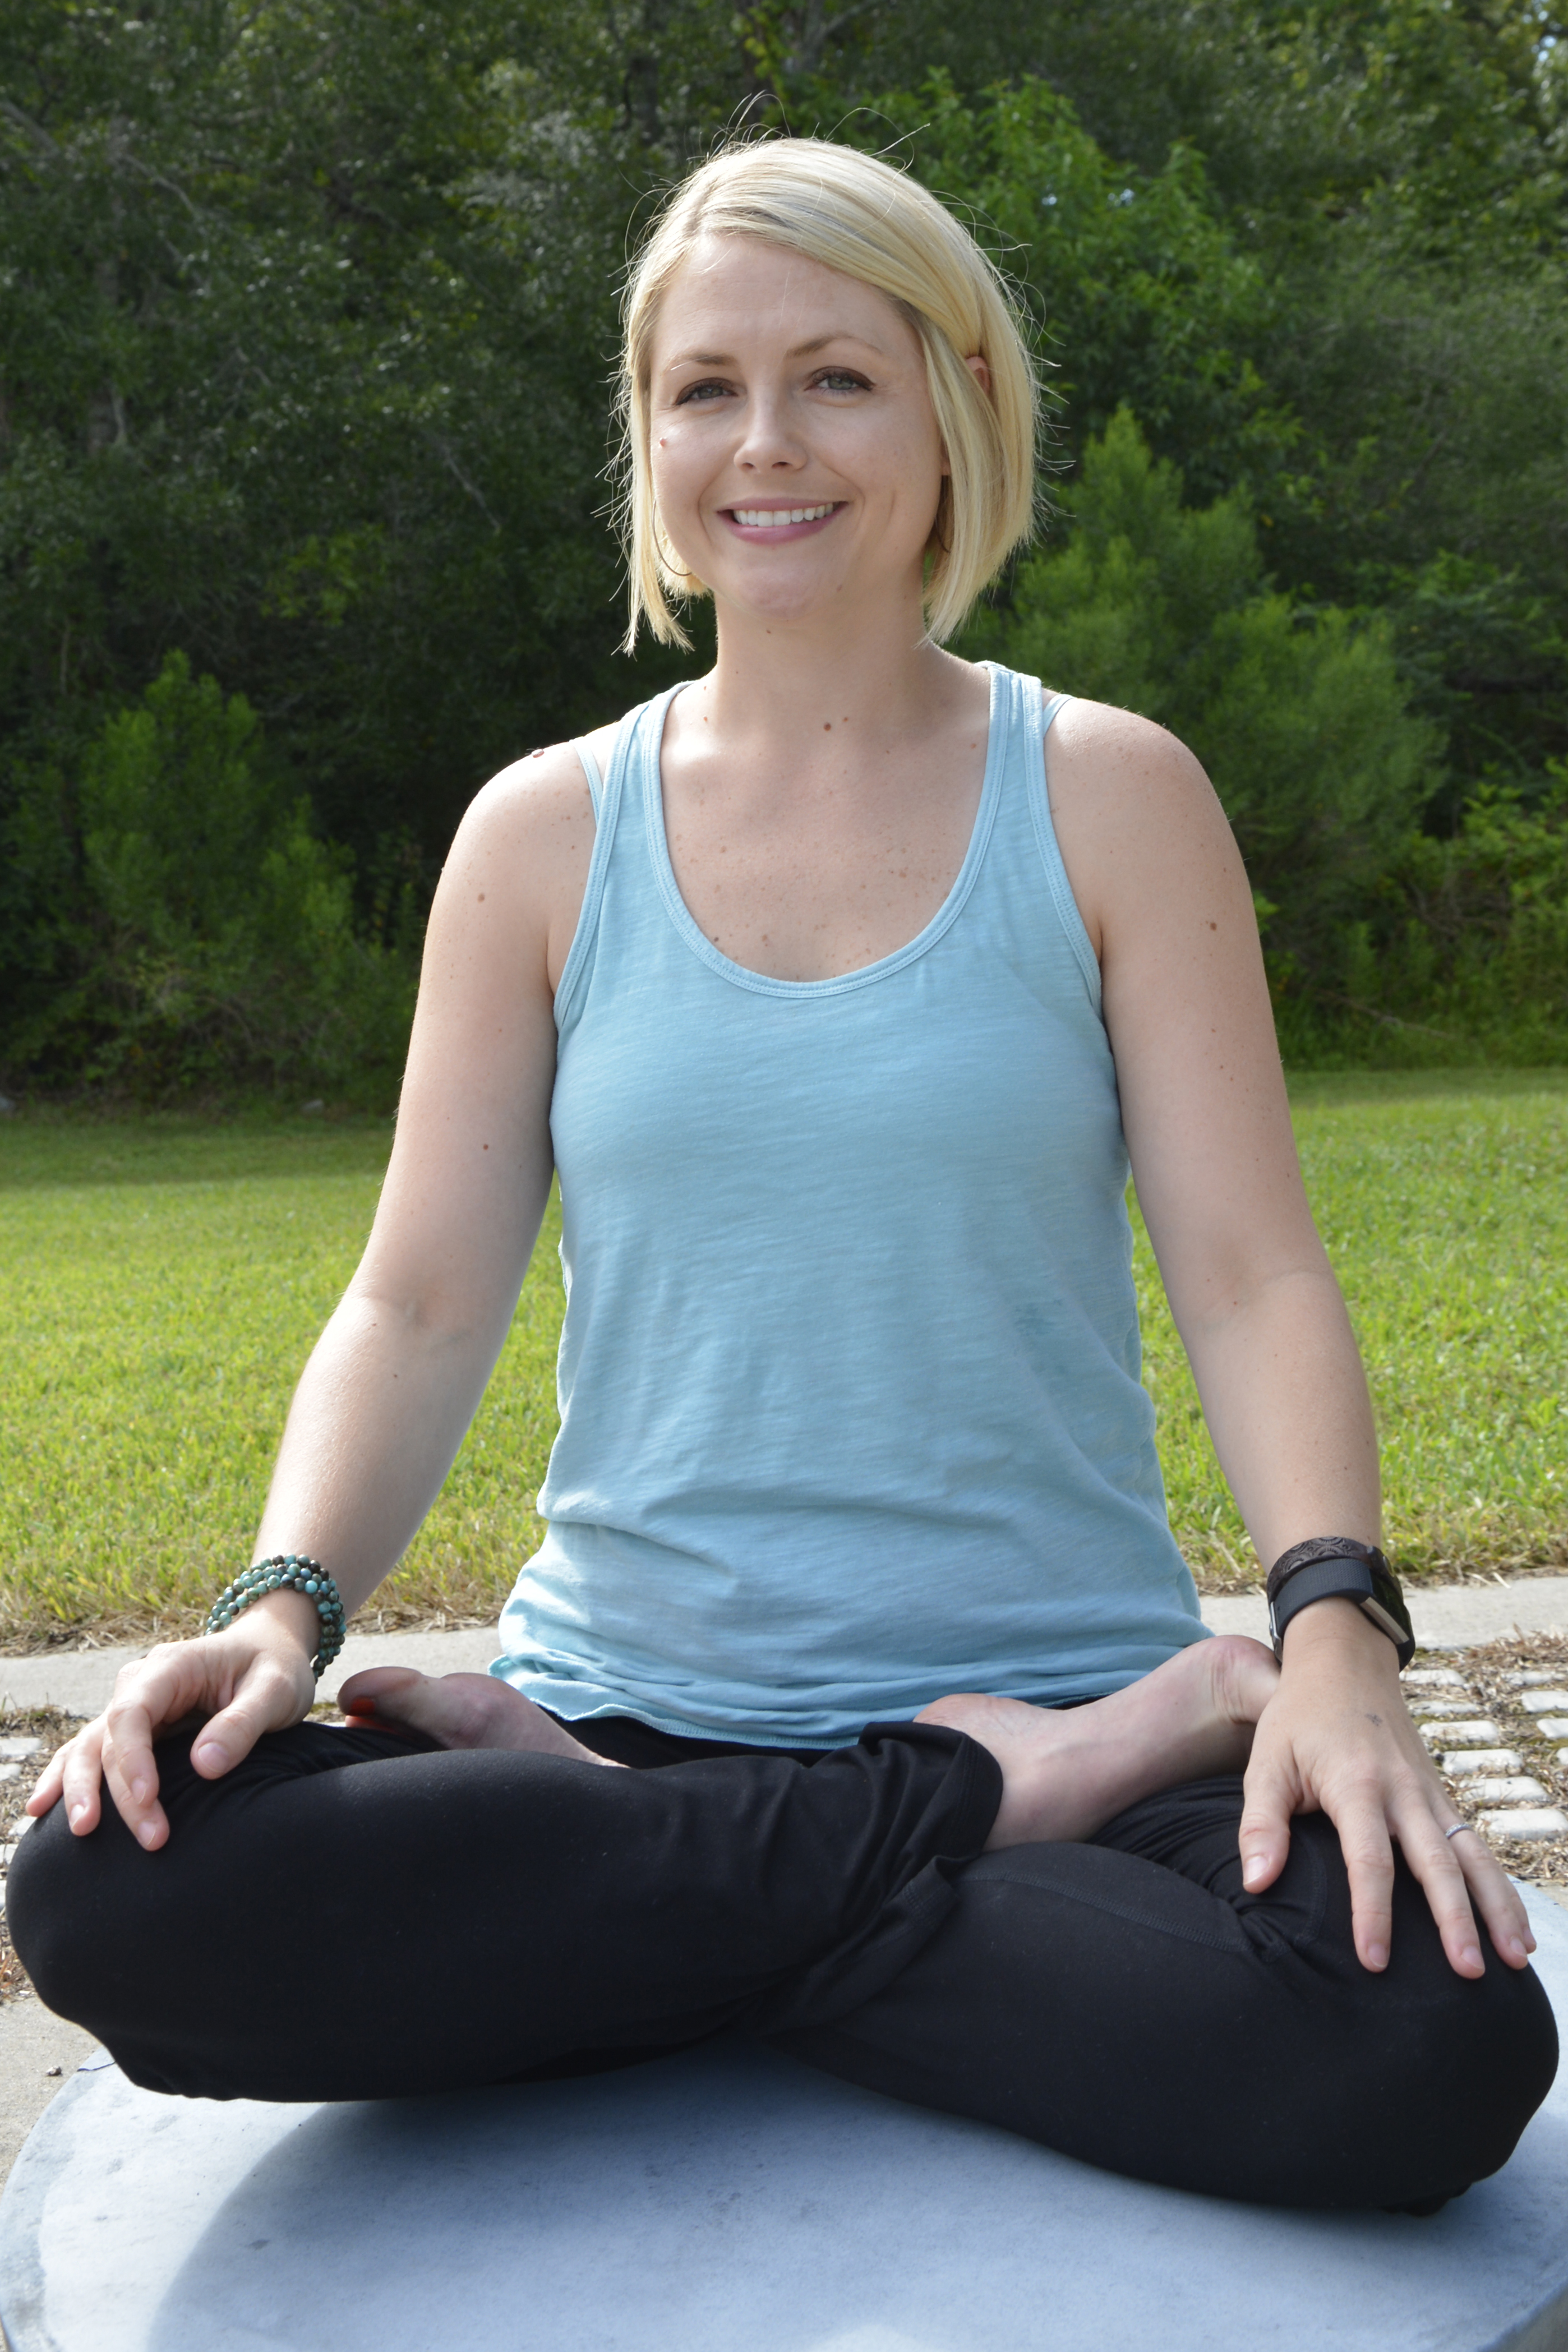 PHOTO: Julia Englund Strait, University of Houston-Clear Lake associate professor of school psychology, said she hopes her yoga class will help participants physically and emotionally, as well as increase their mental clarity. The eight-week class, offered through UH-Clear Lake’s Friday Morning Continuing Education program, starts Sept. 1. “If people would like to just come and learn about yoga, I’m glad to have them, but I’m also giving people the option to participate in some research I’m doing. This class is a bit of a pilot program as well,” said Strait, who is also director of UHCL’s Psychological Services Clinic. Photo courtesy of the Office of University Communications.